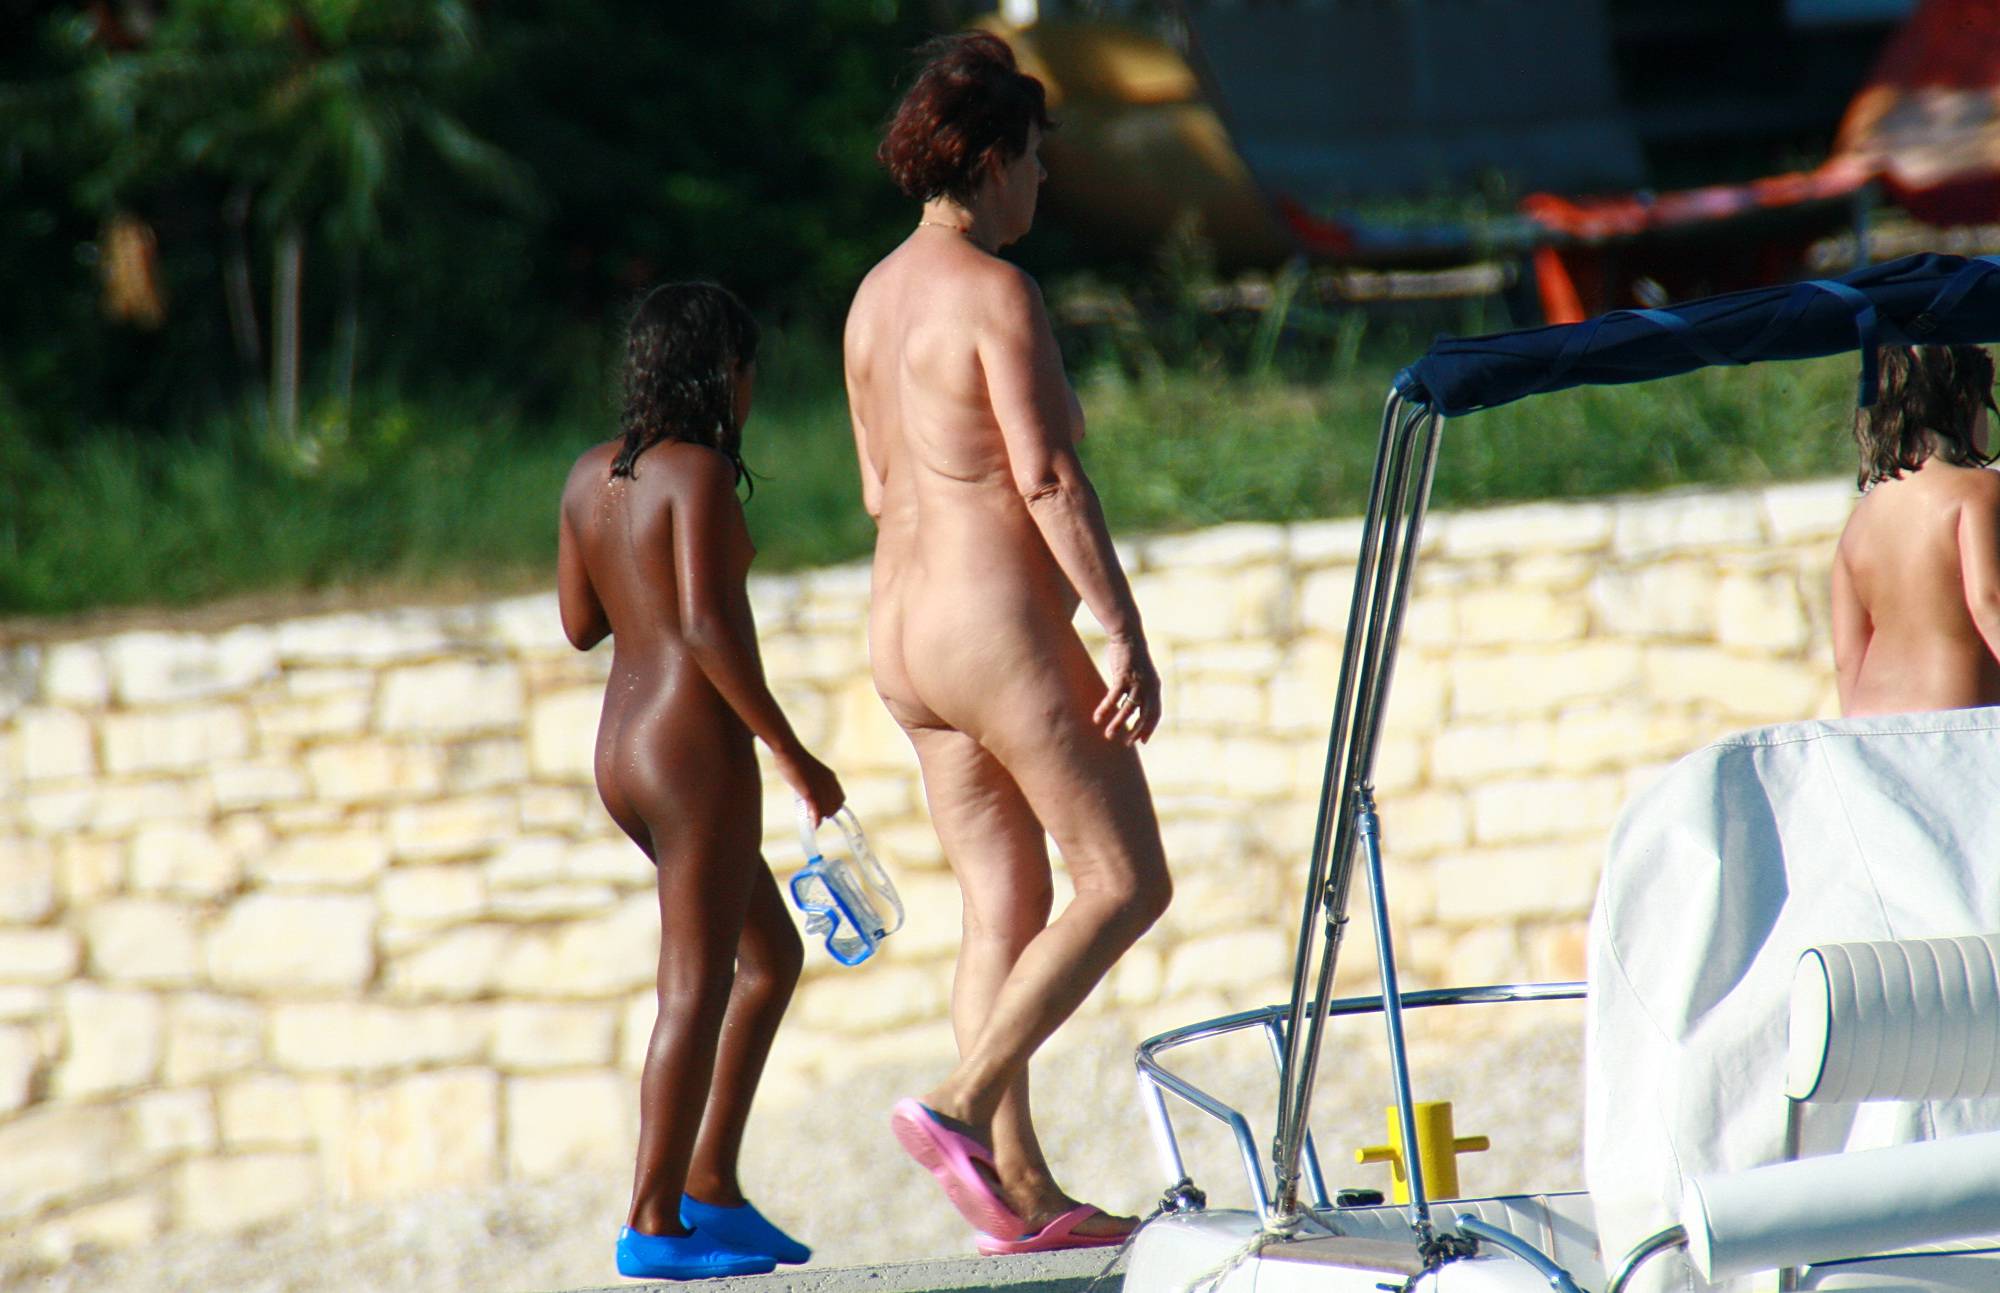 Nudist Photos Lazy Day Strolling About - 2